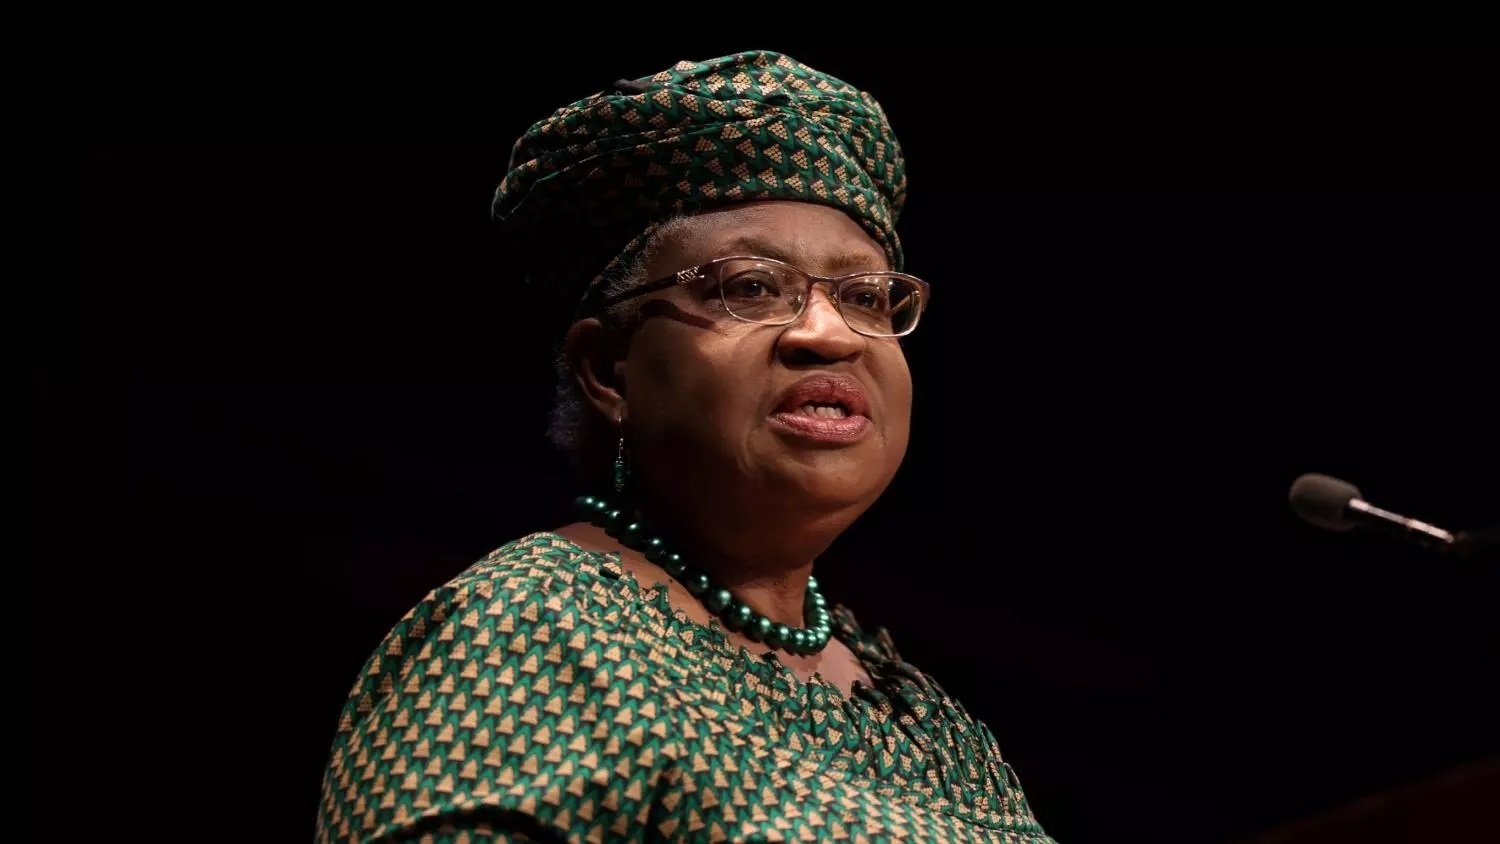 Led by the World Trade Organization, the major international institutions have commenced an inventory of industrial subsidies worldwide. Pictured: WTO Director-General Ngozi Okonjo-Iweala gives the Lowy Lecture on 22 November 2022 (Lowy Institute)